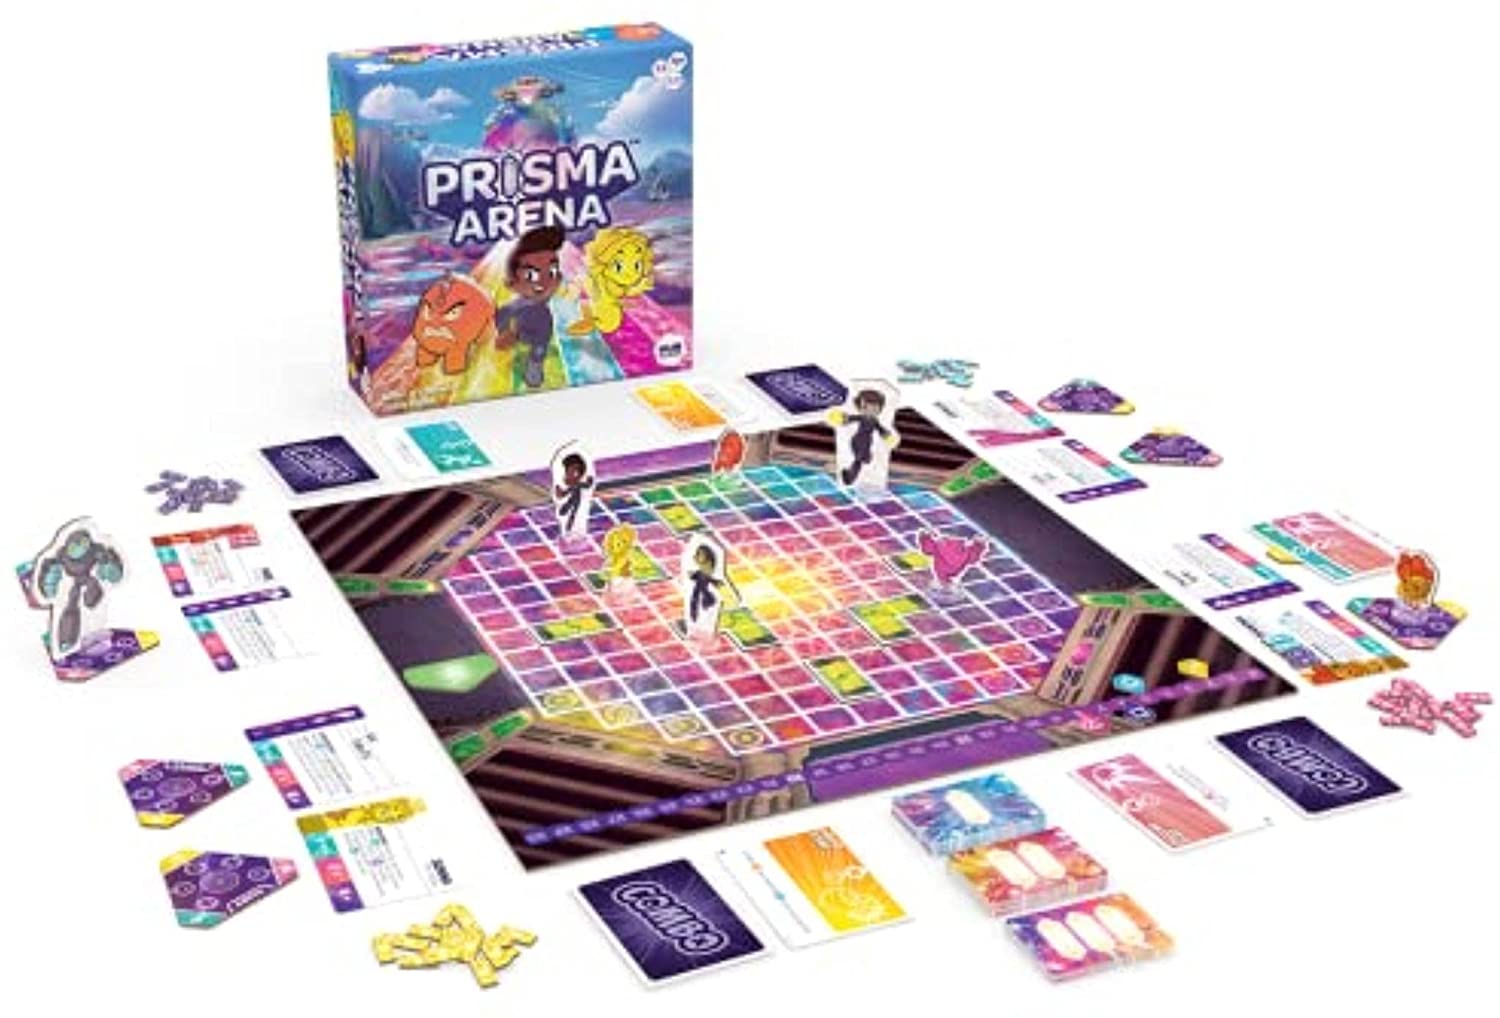 Find out about Prisma Arena